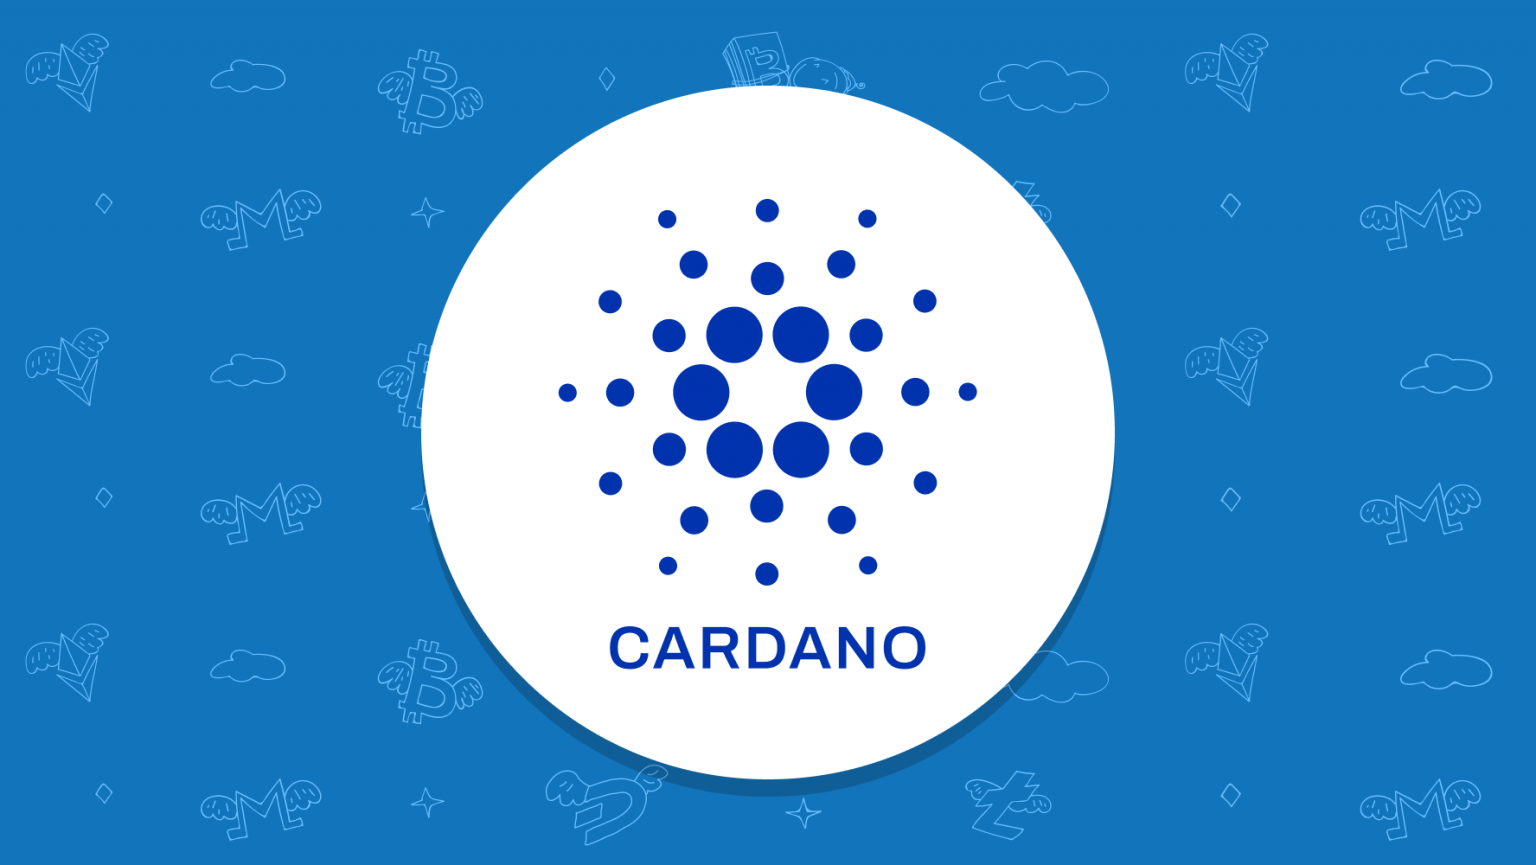 A look at Cardano, a controversial blockchain-based project led by Ethereum cofounder Charles Hoskinson that aims to build a national ID system for Ethiopia (Elizabeth M. Renieris/CIGI)